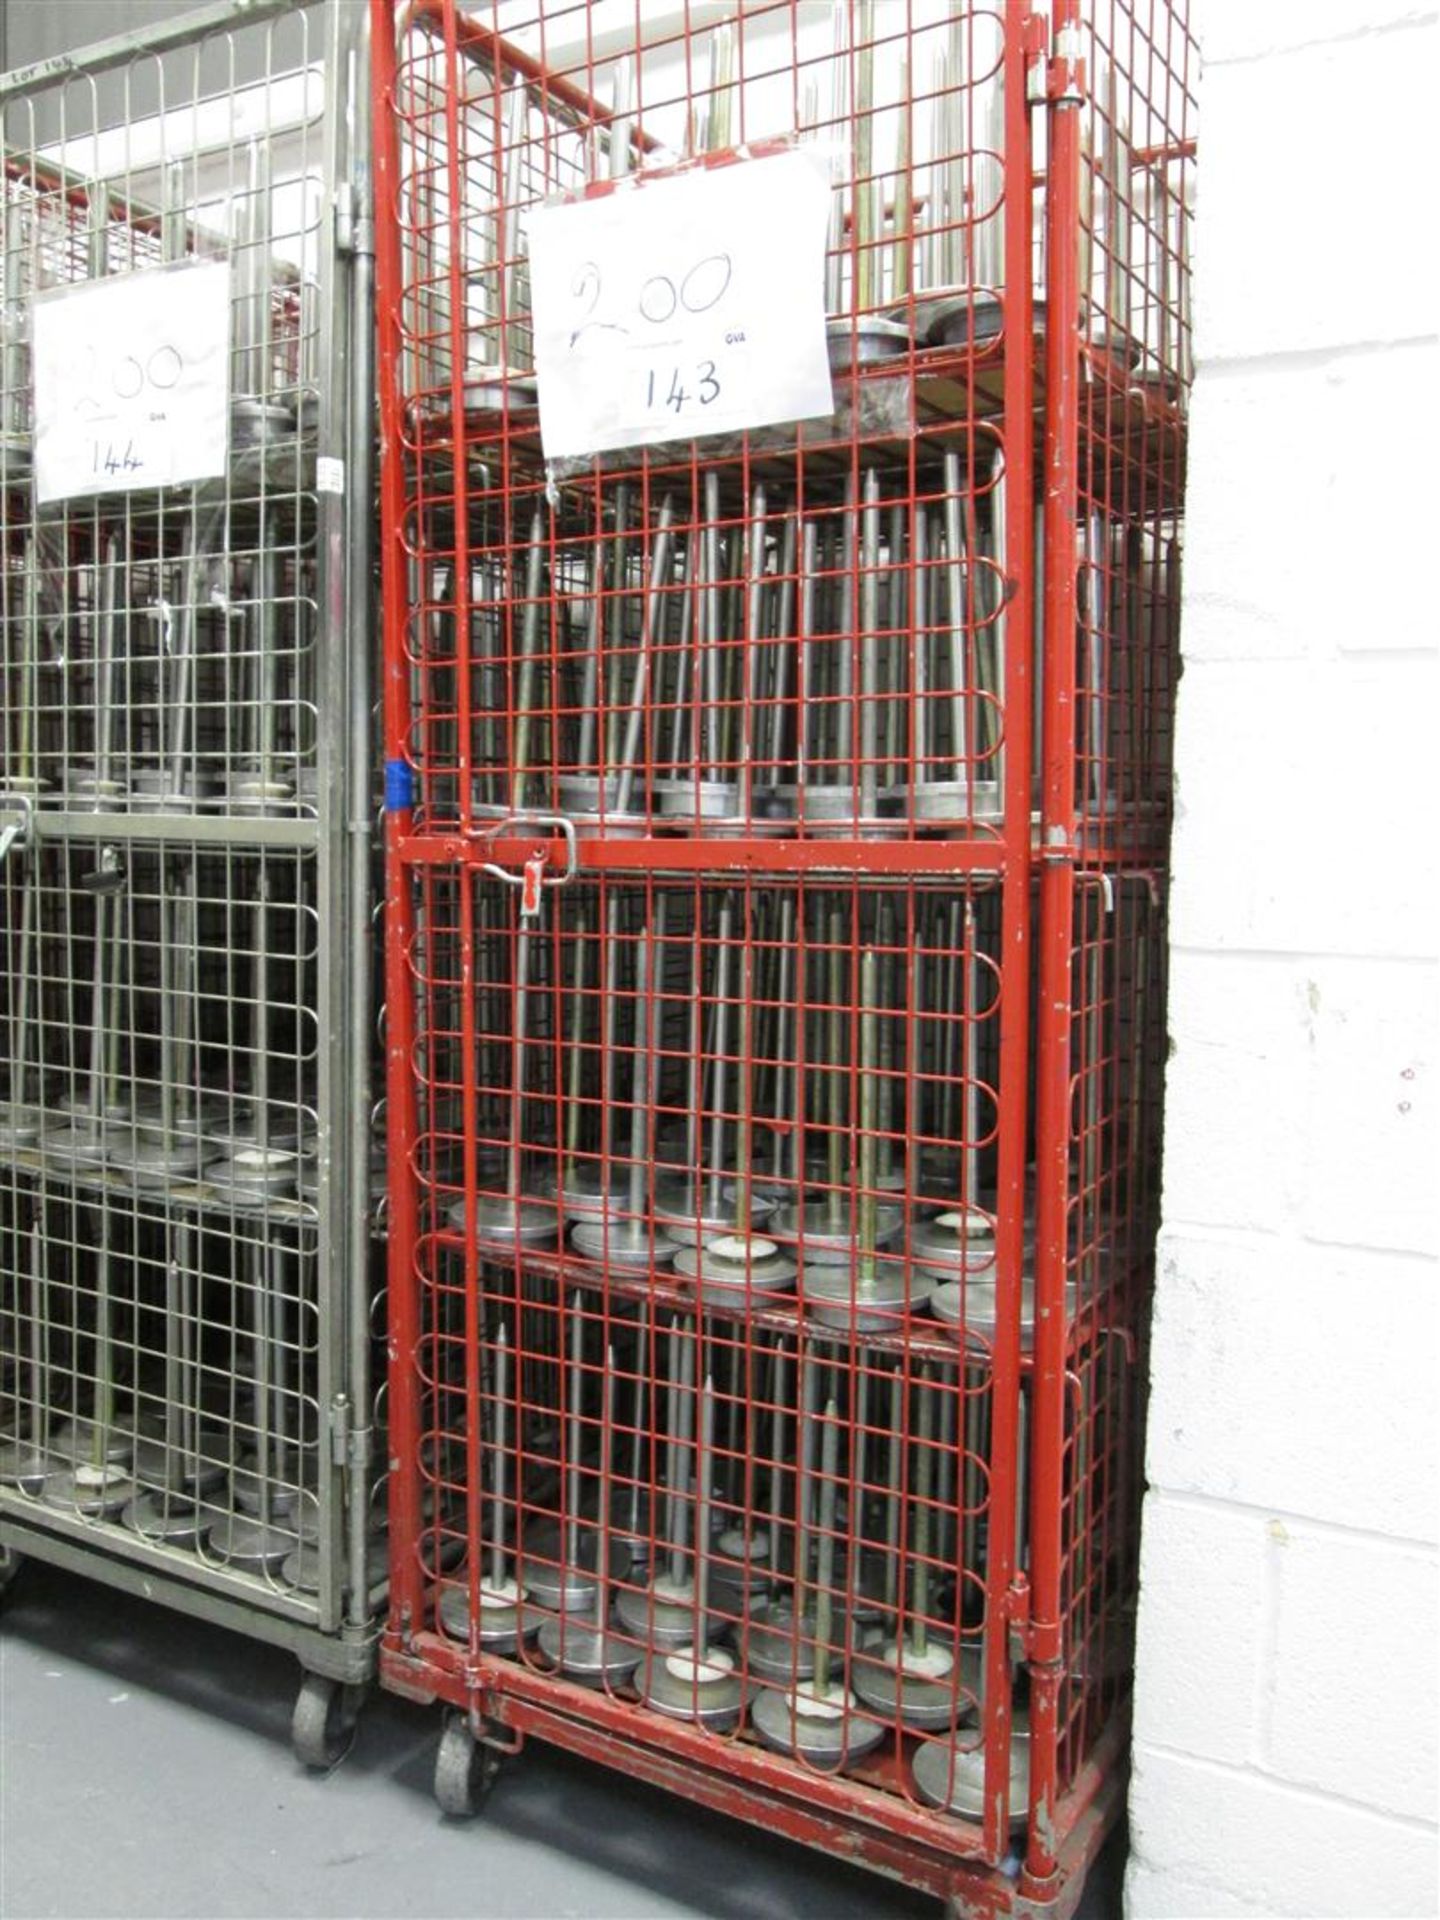 Trolley and contents (200: CD / DVD spindles (aluminium base / stainless steel spindle)

Note:

This